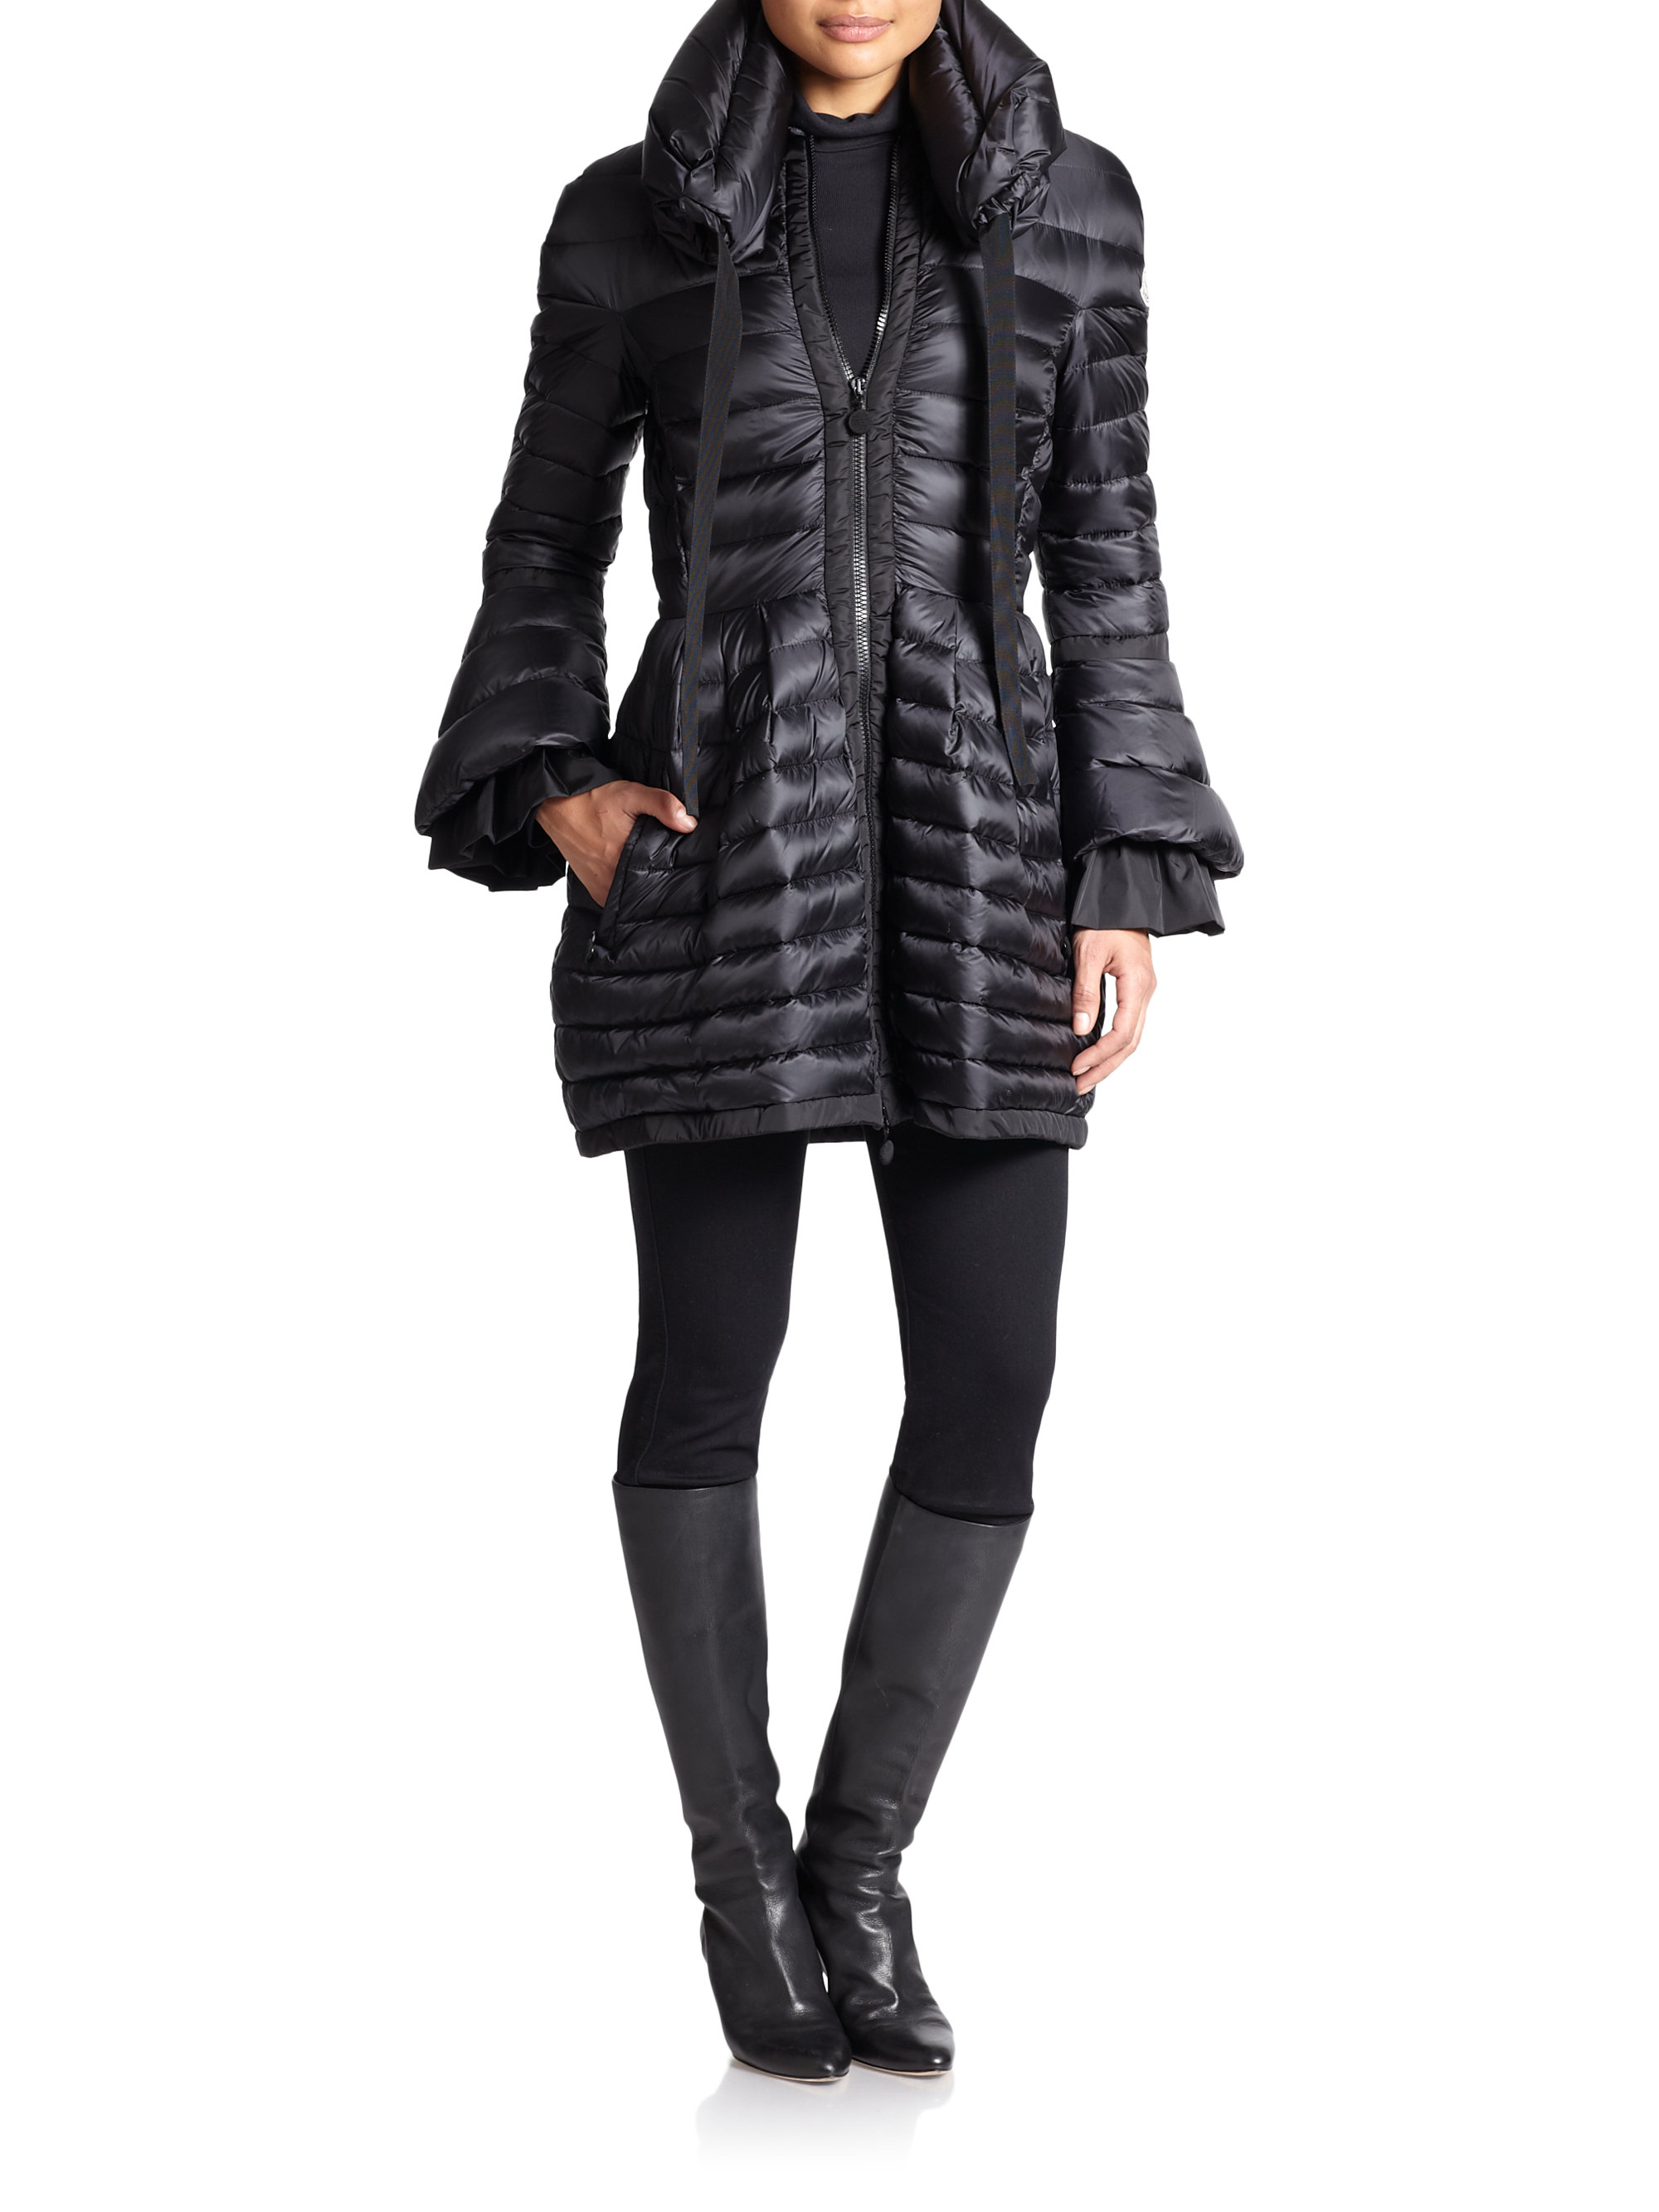 Moncler Couperin Puffer Jacket in Black - Lyst